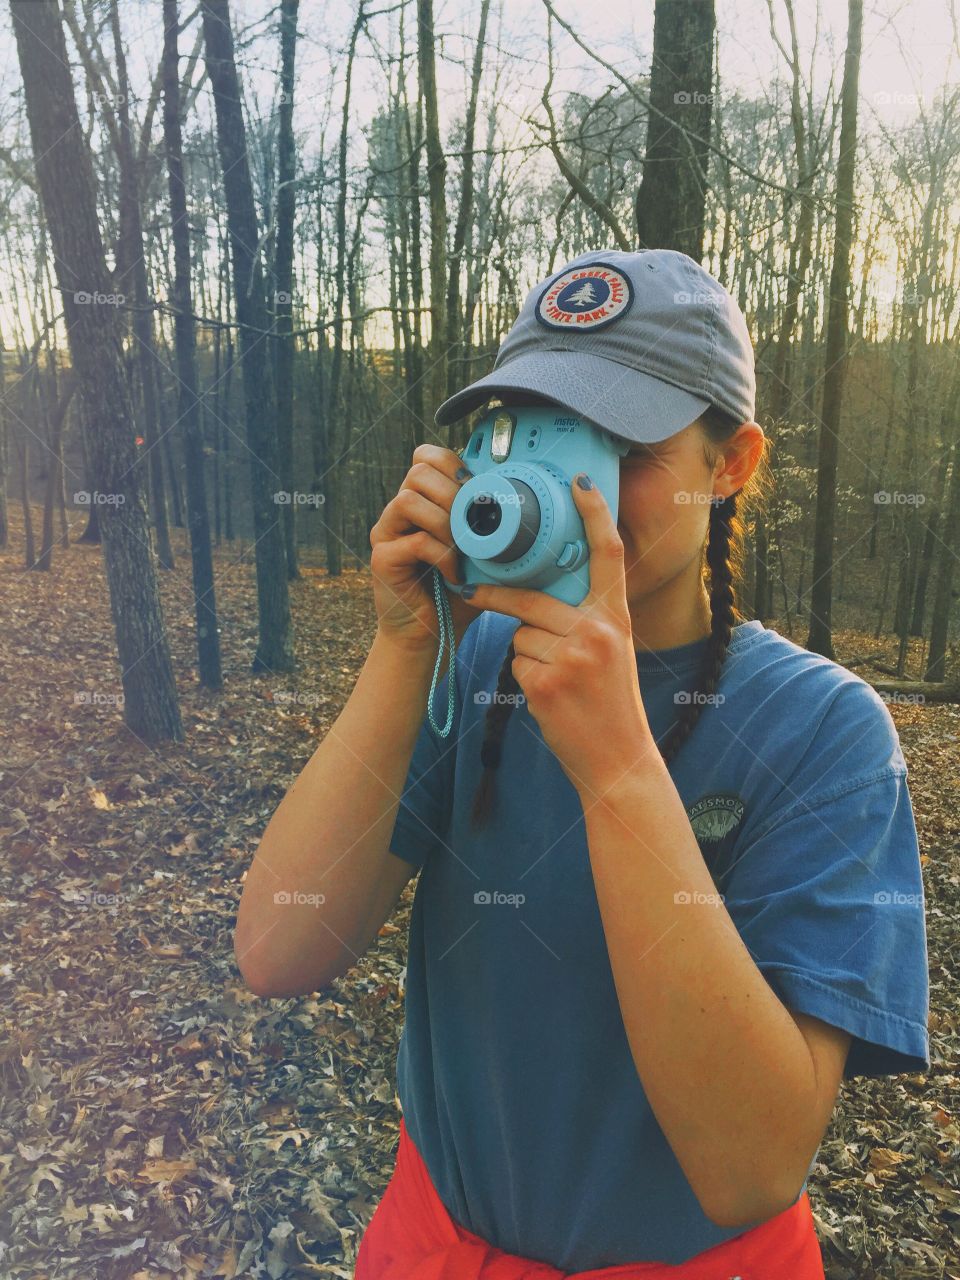 Instax in the woods.